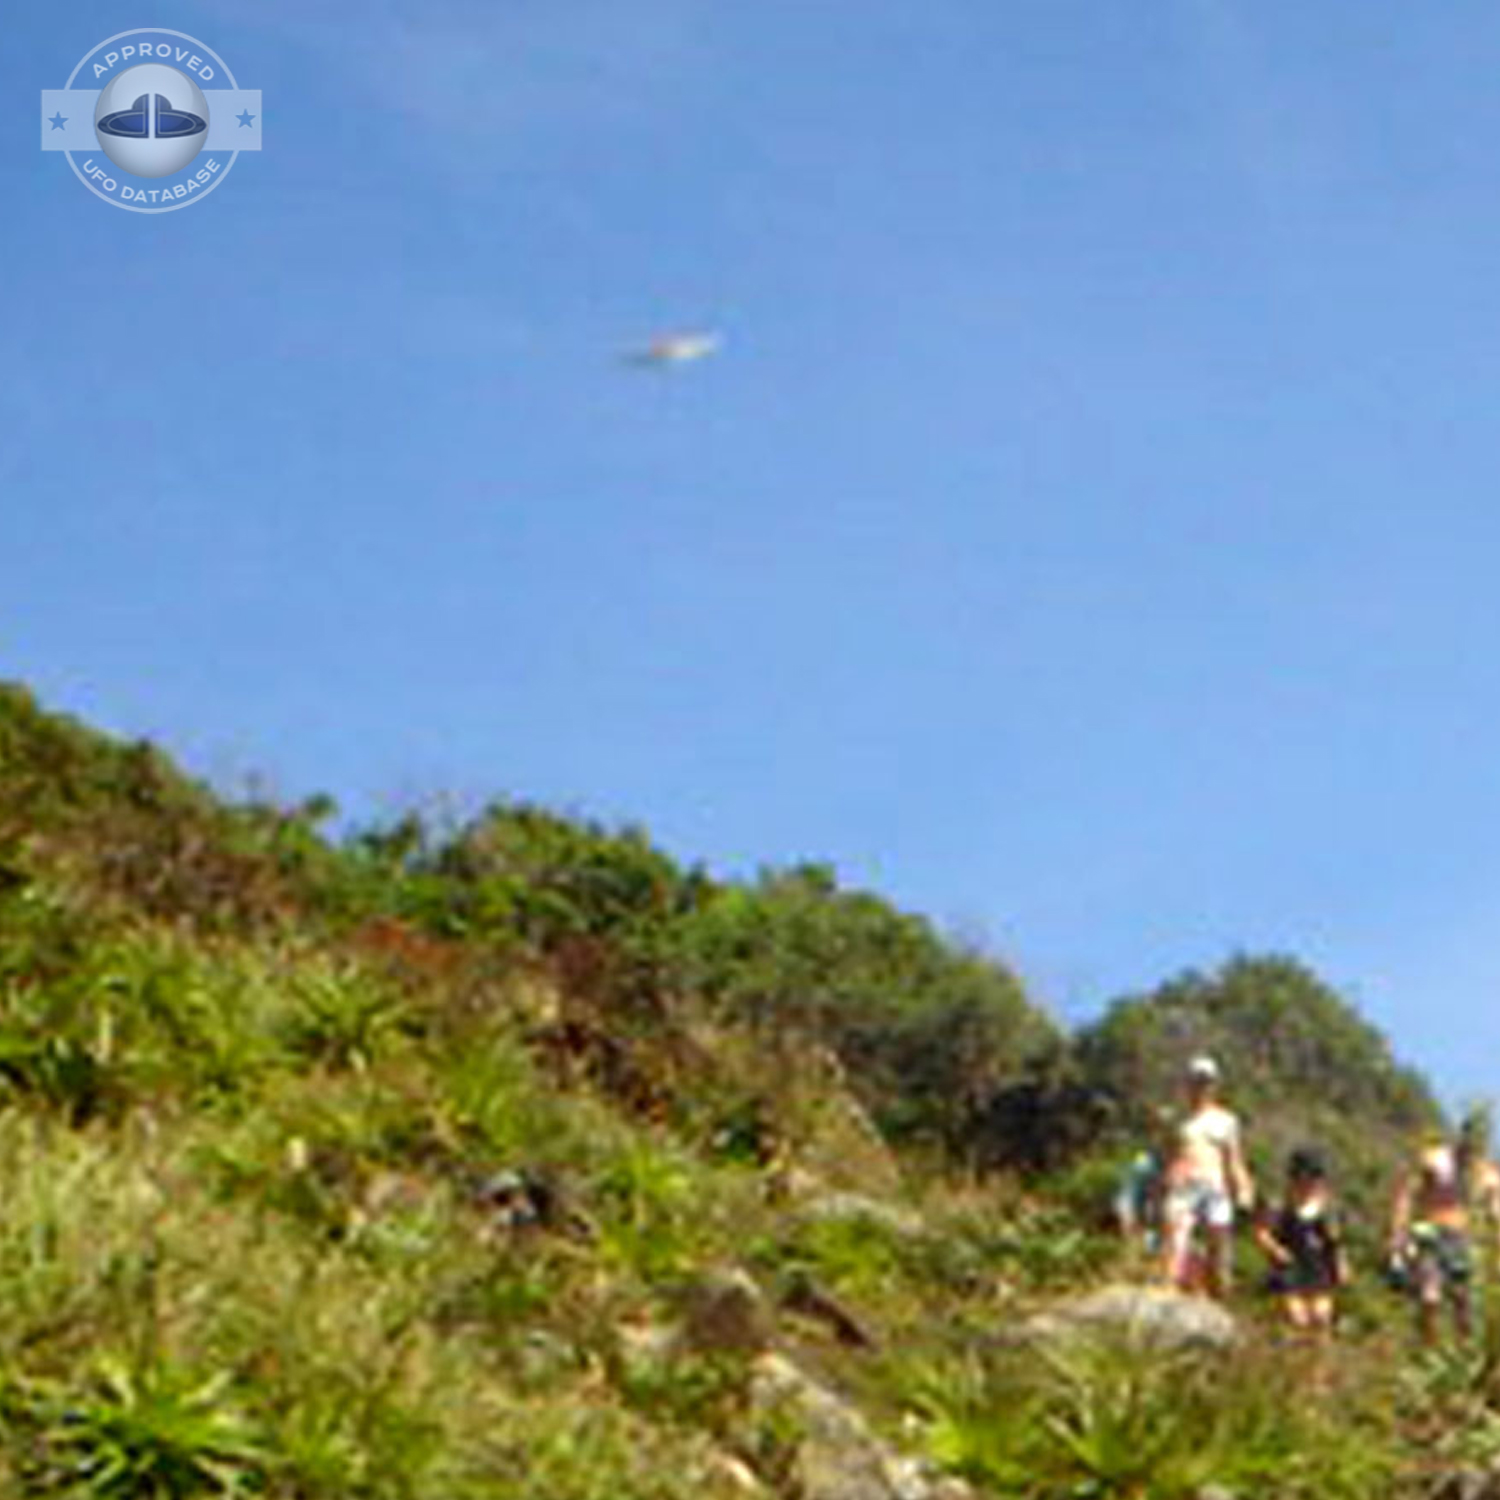 UFO is Flying in bright day light over several tourists UFO Picture #16-2